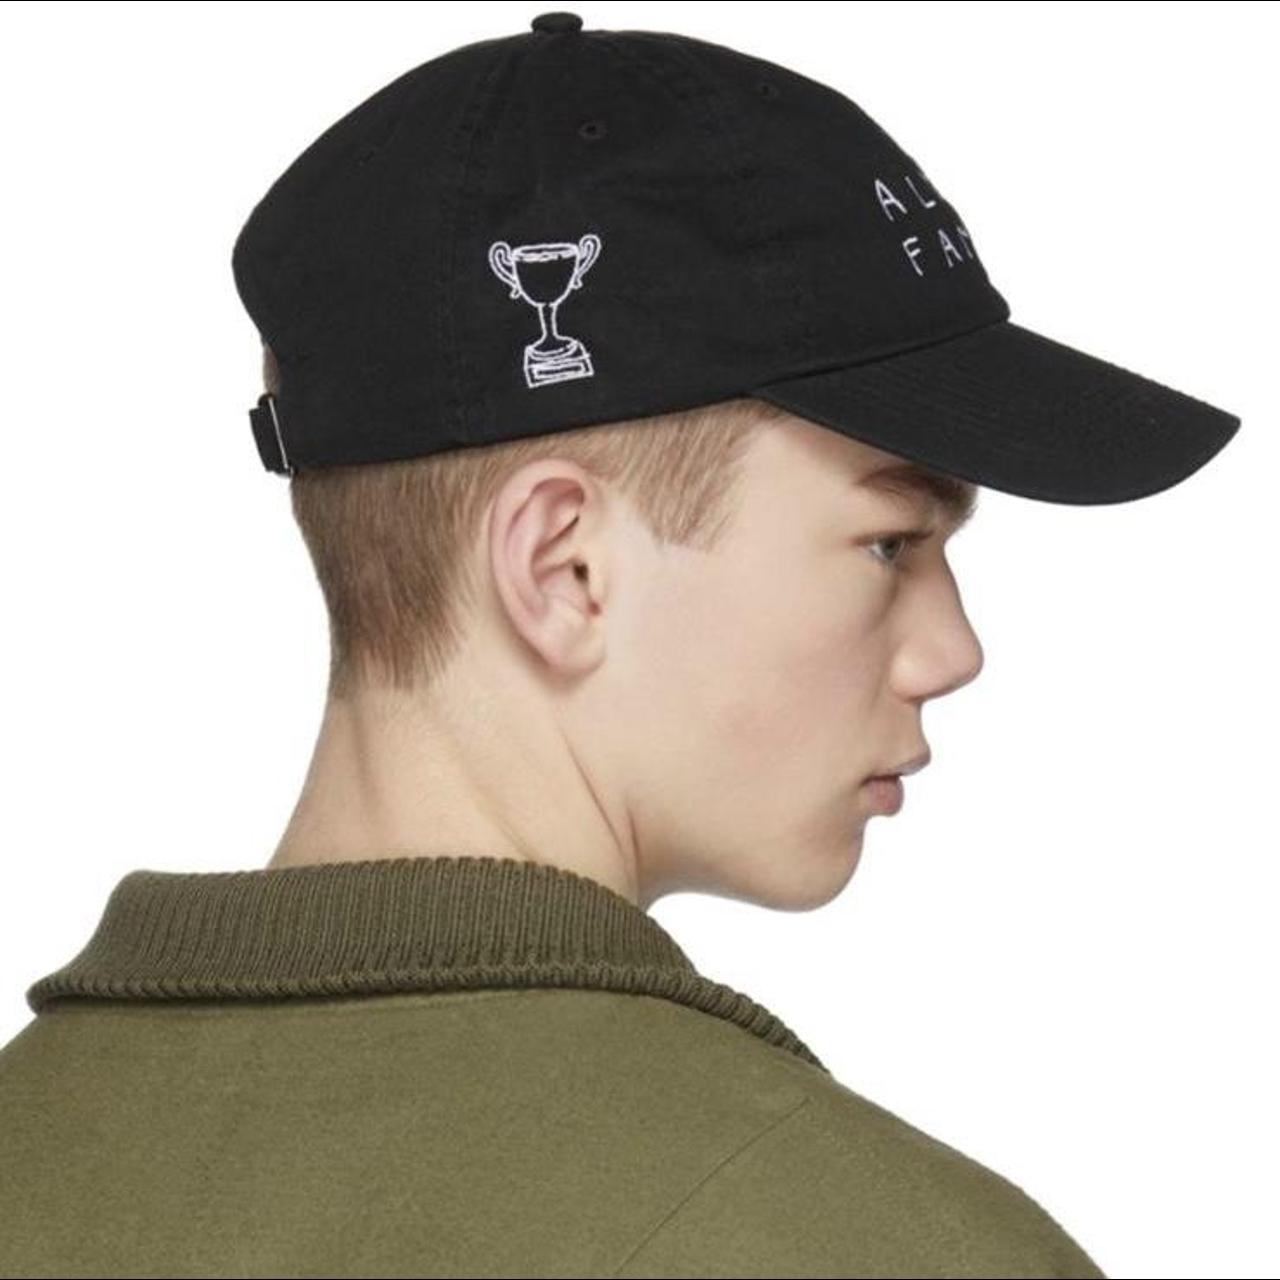 Product Image 4 - NASASEASONS “almost famous” cap. Cotton